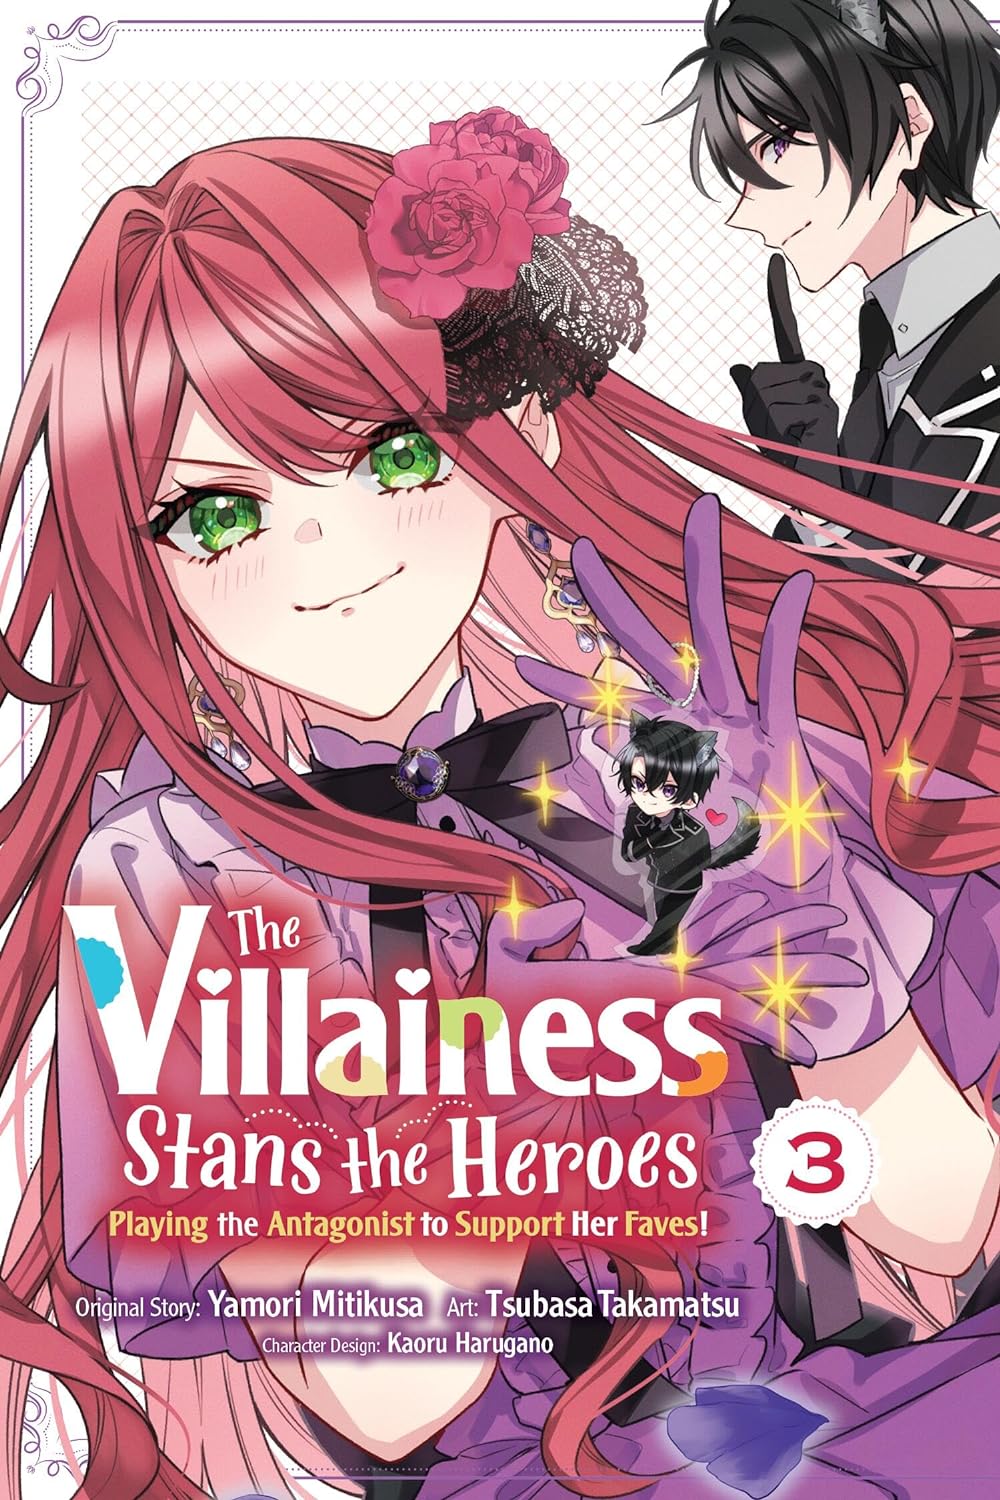 The Villainess Stans the Heroes: Playing the Antagonist to Support Her Faves! (Manga) Vol. 03